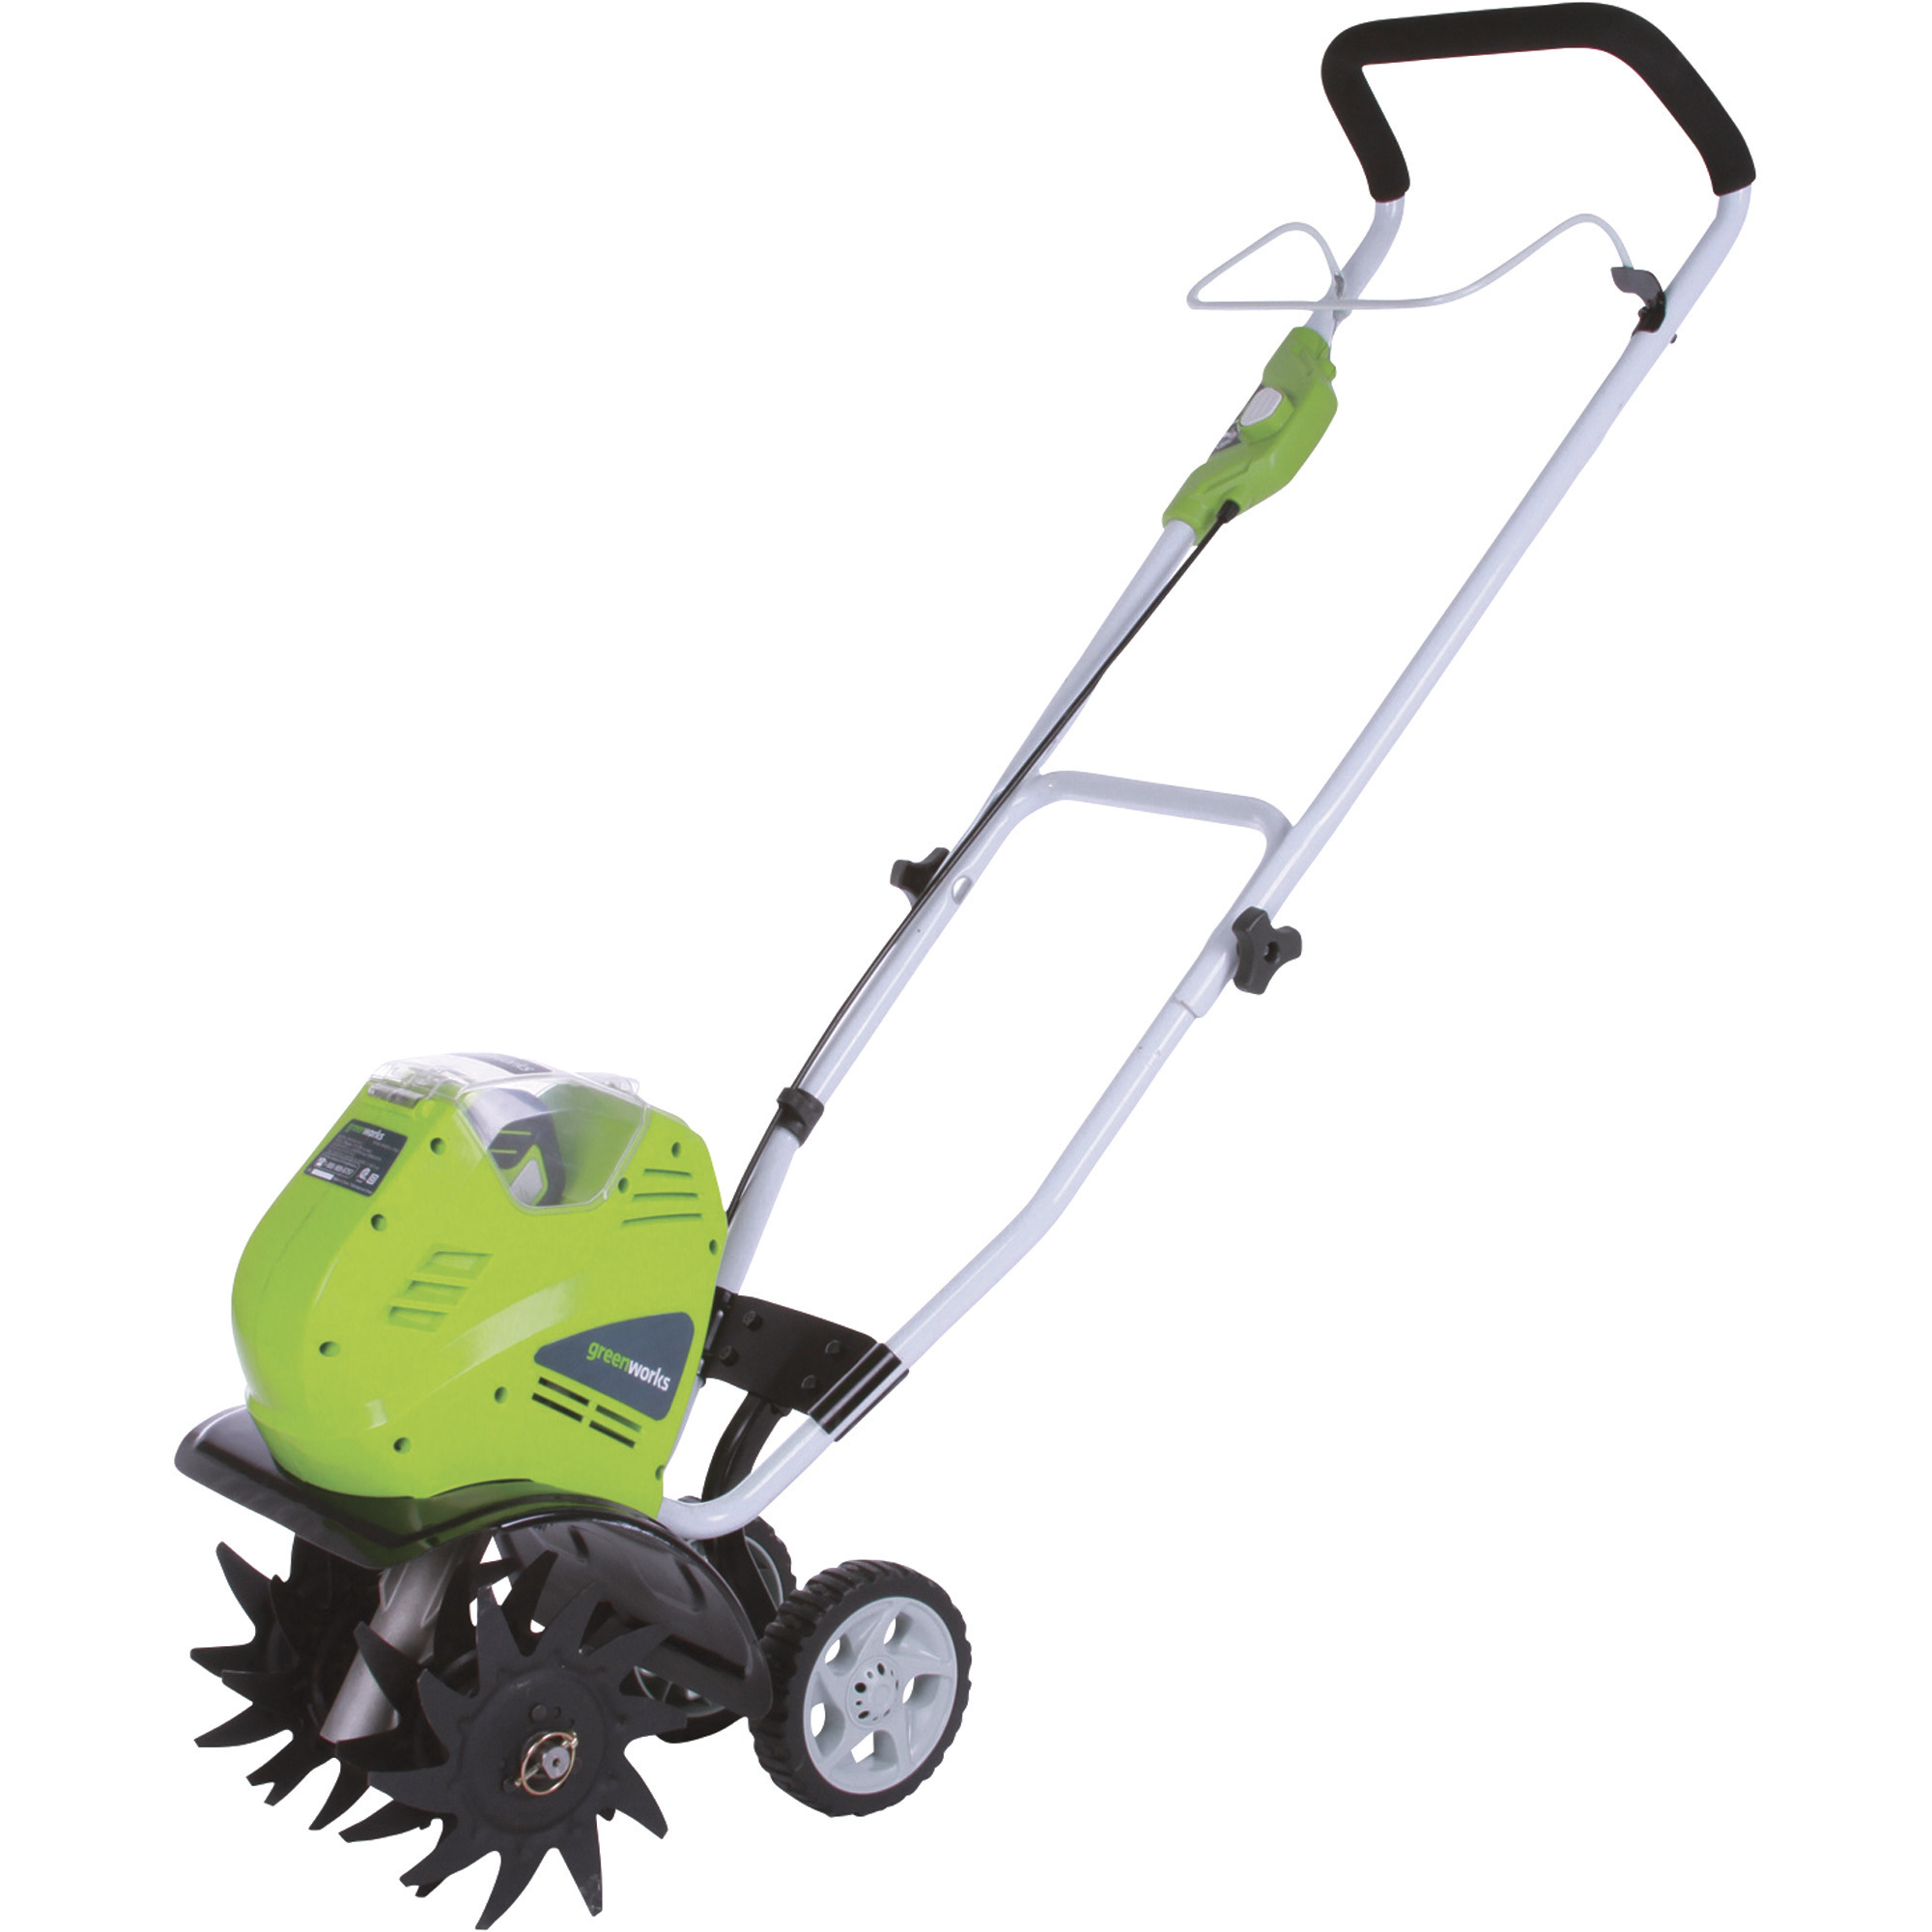 Greenworks 40V Li-Ion Cordless Cultivator, 8 1/4in. to 10in. Working Width,  Model# 27062